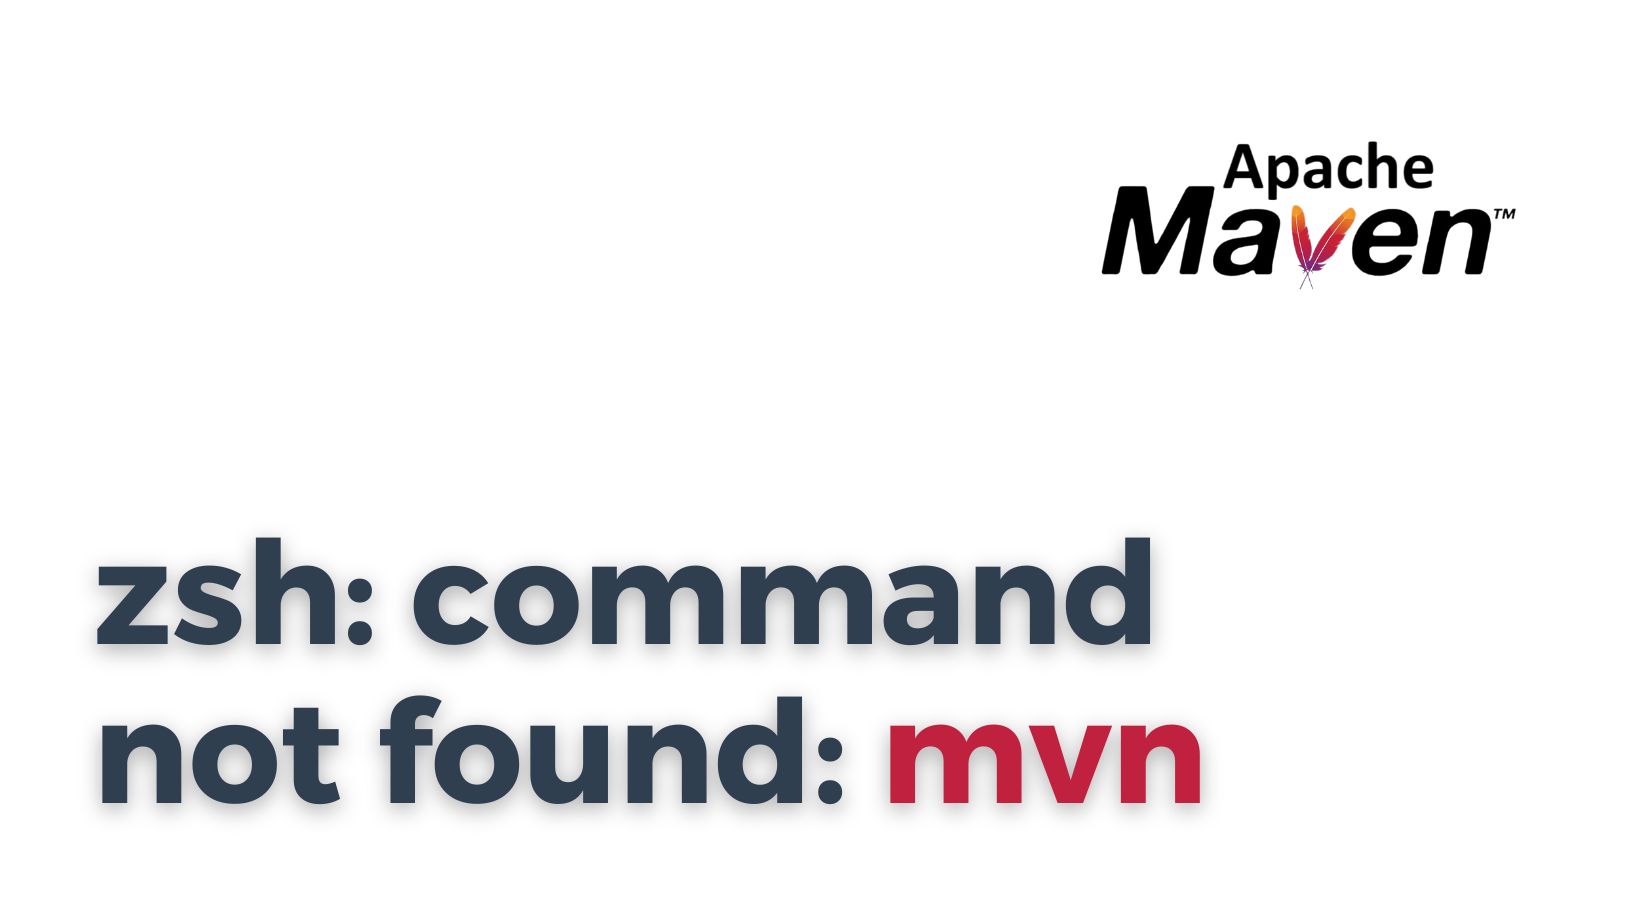 zsh: command not found: mvn